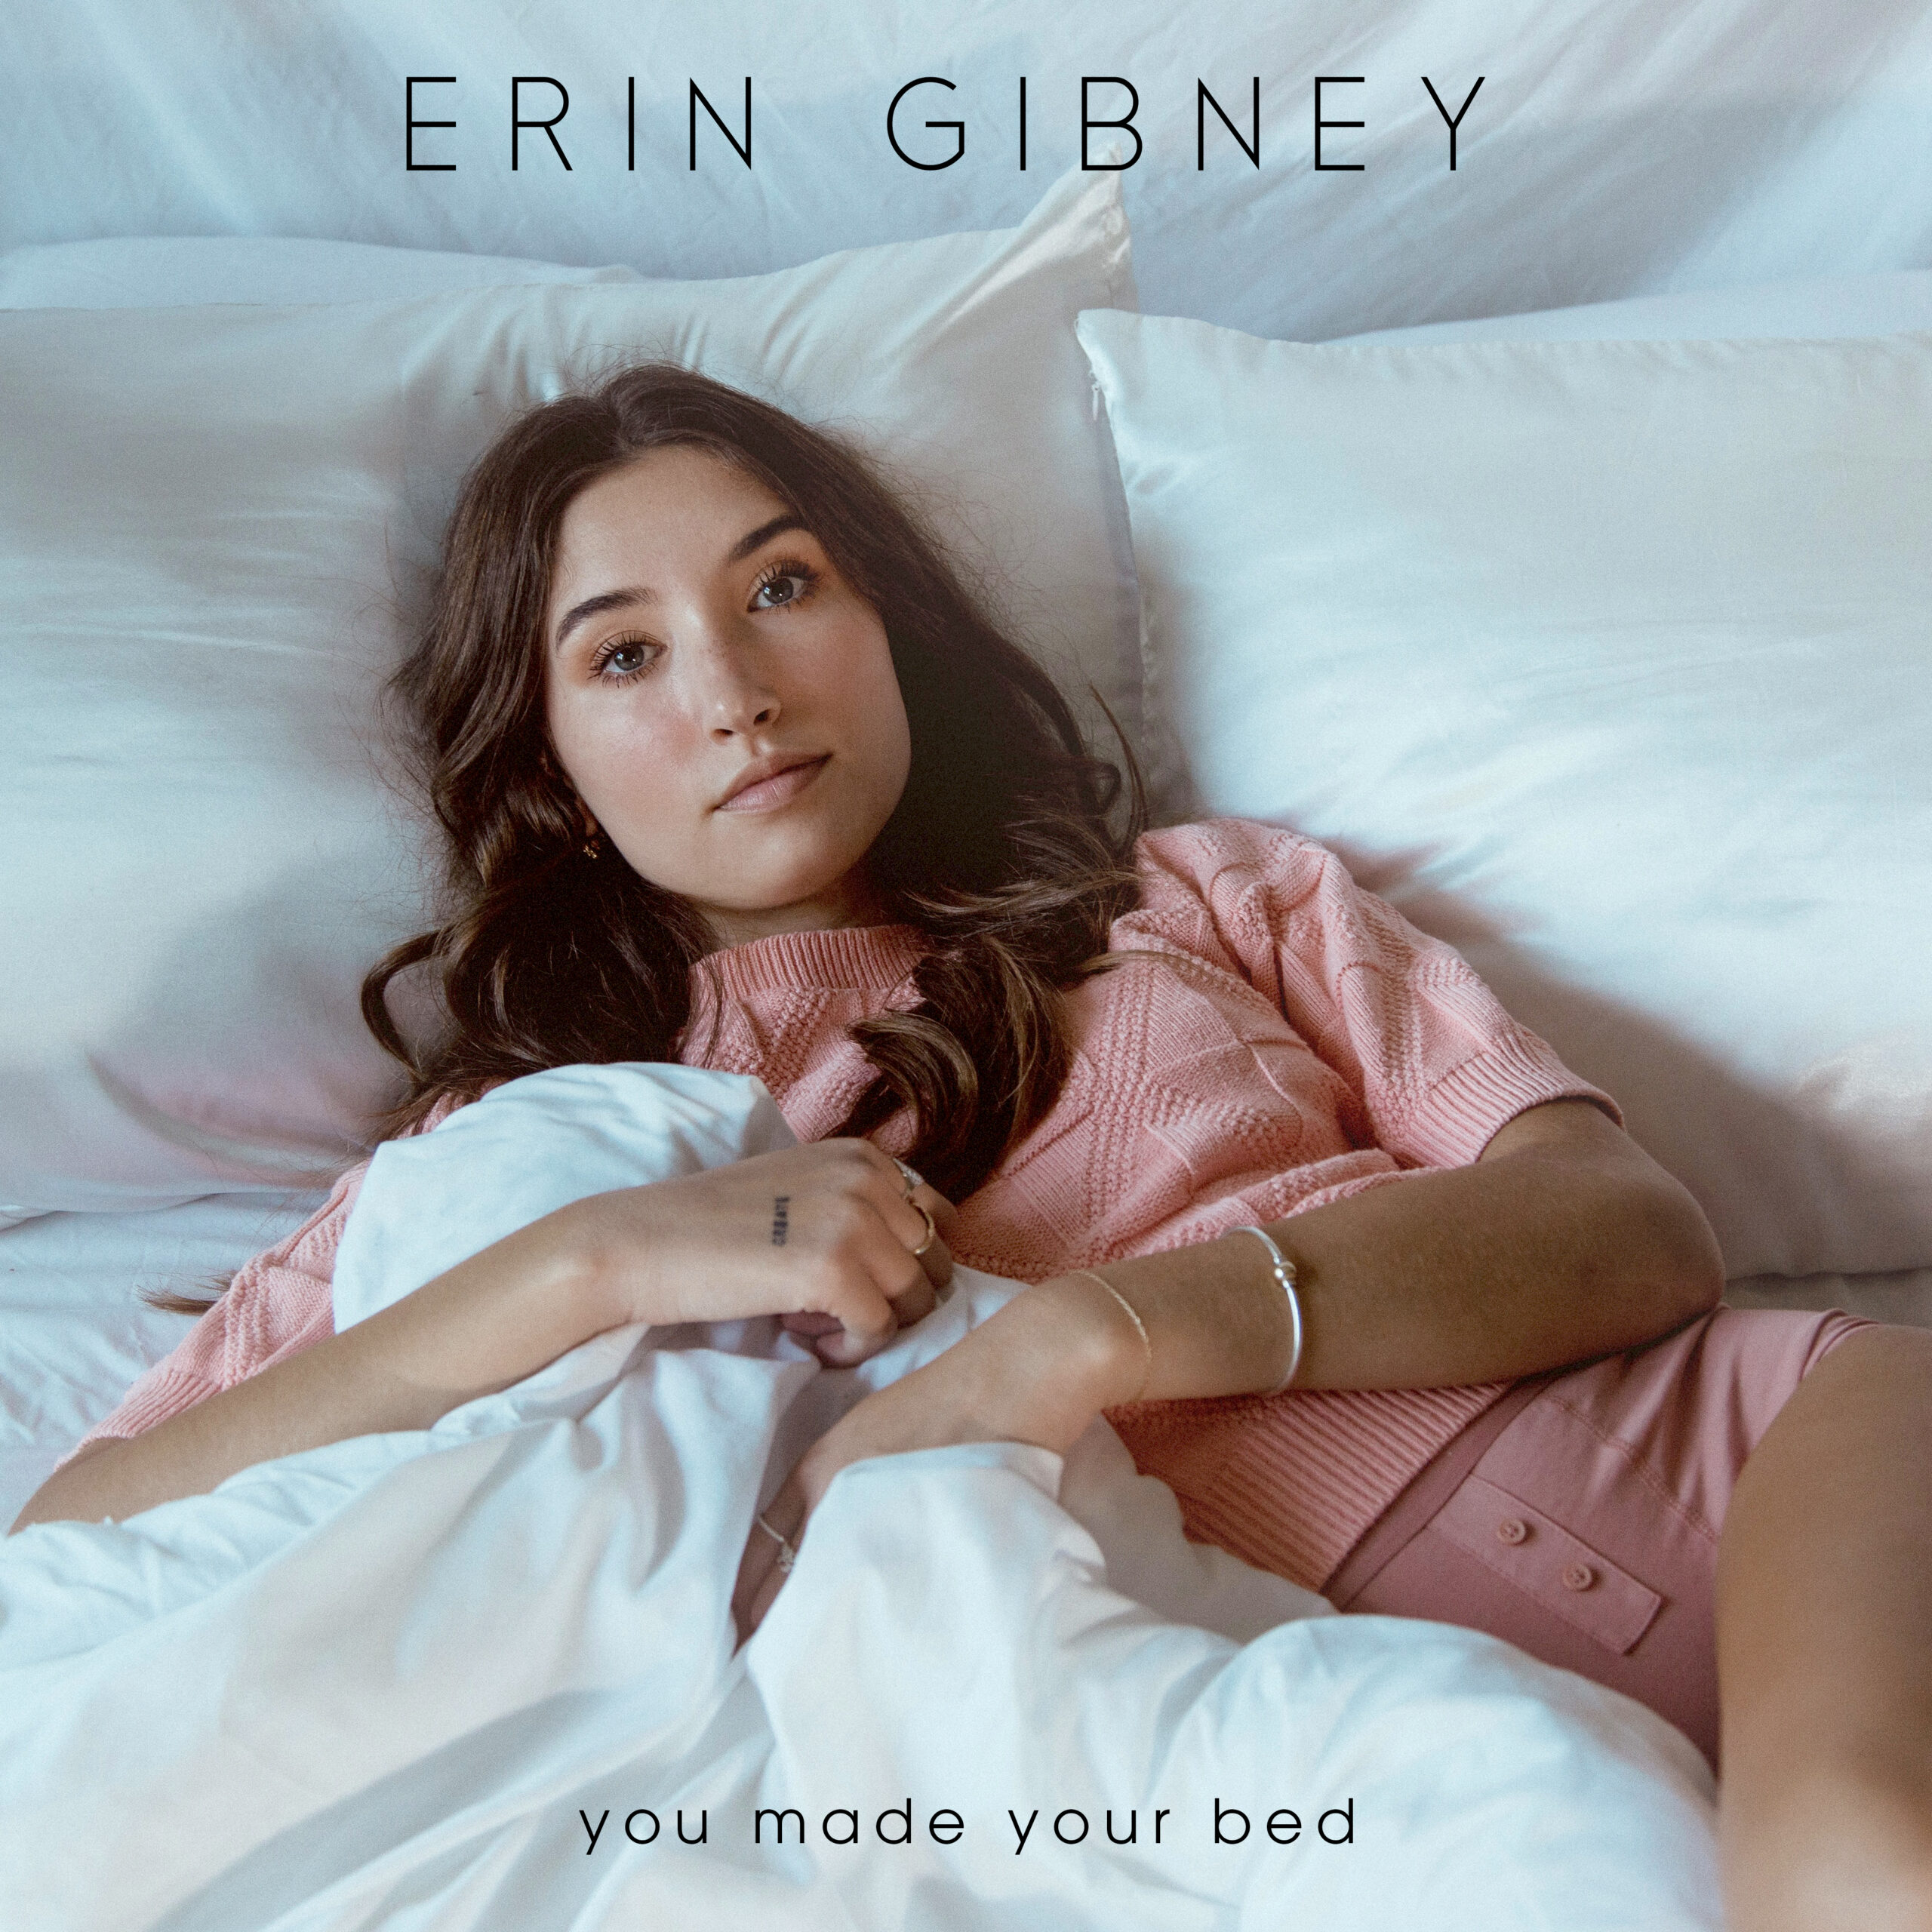 Erin Gibney “You Made Your Bed” single artwork